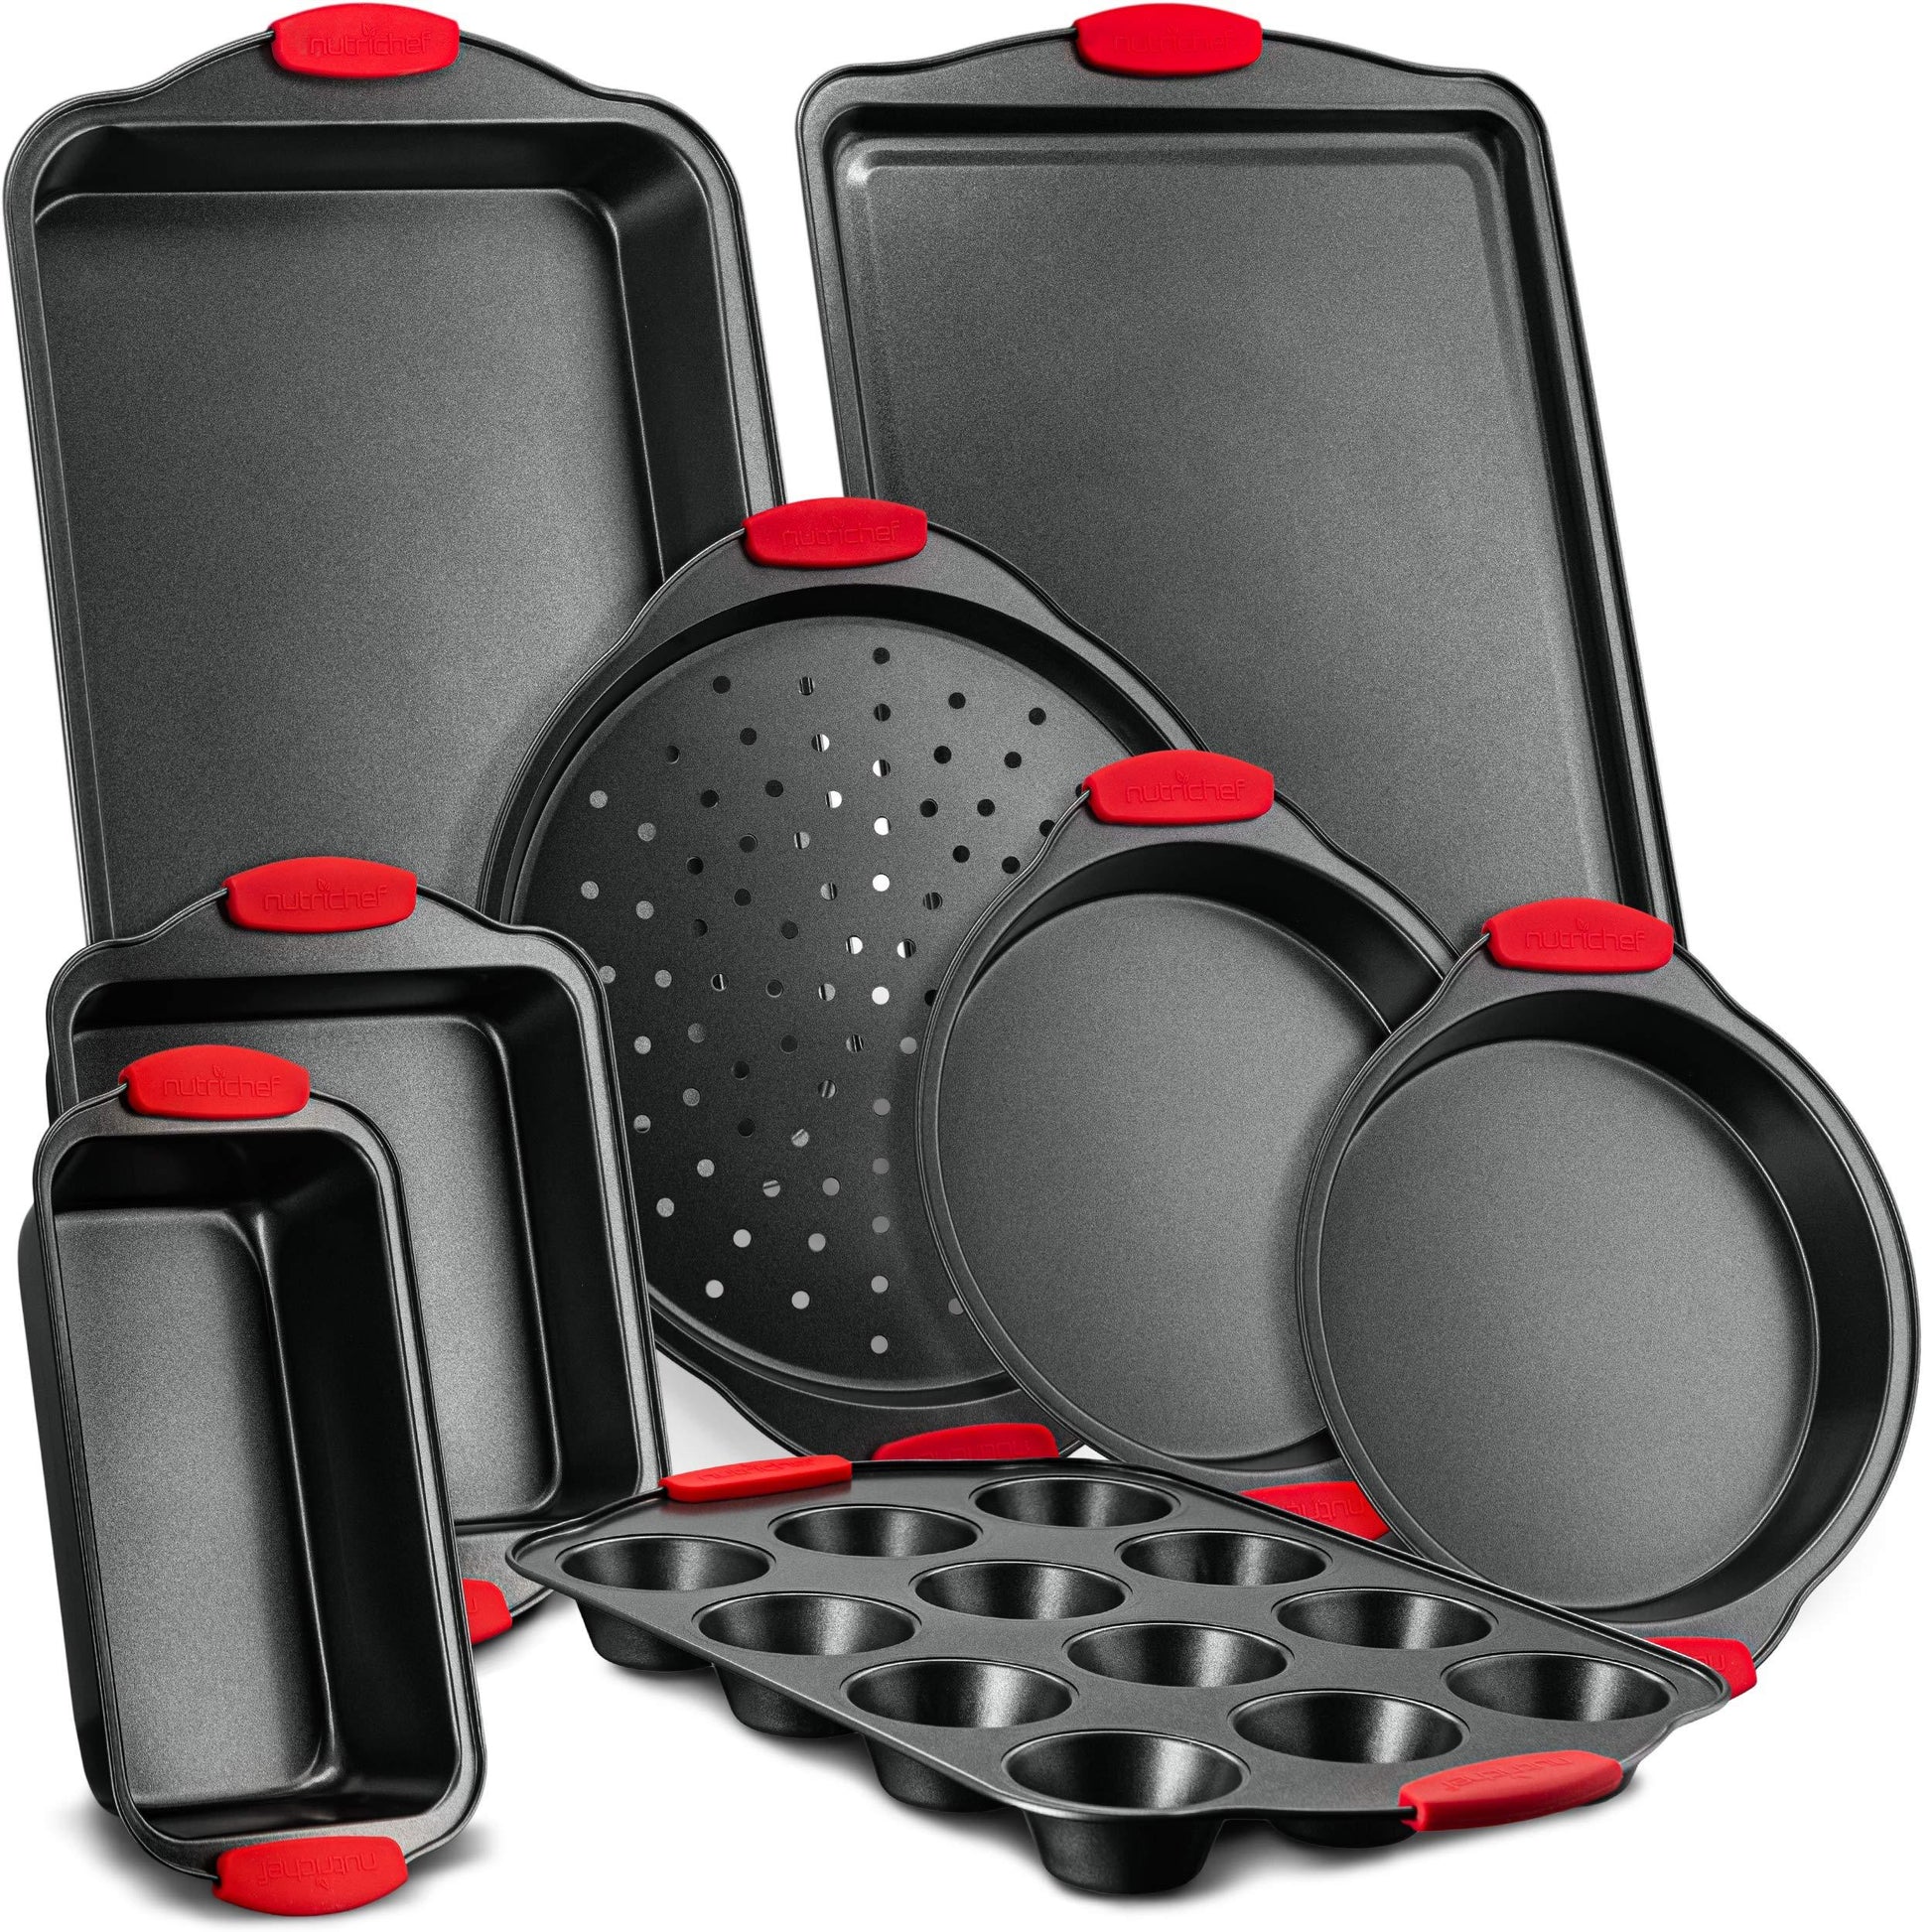 Nutrichef w/Heat Red Silicone Handles, Oven Safe, 8 Piece Set, Black - CookCave